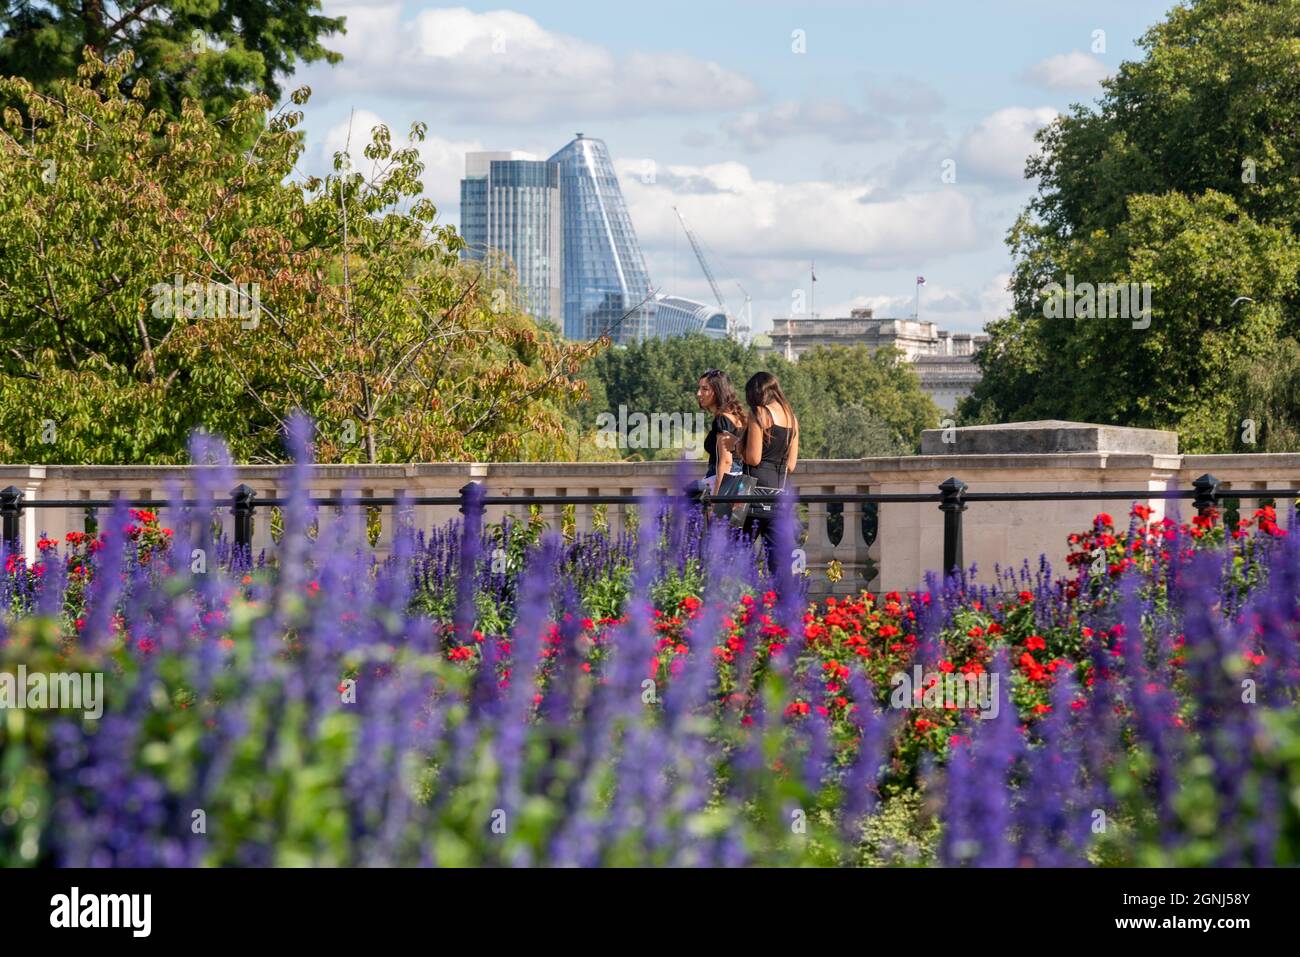 Colourful plants in the flower beds of Buckingham Palace Memorial Gardens, London, UK, with females walking past and high rise city financial district Stock Photo